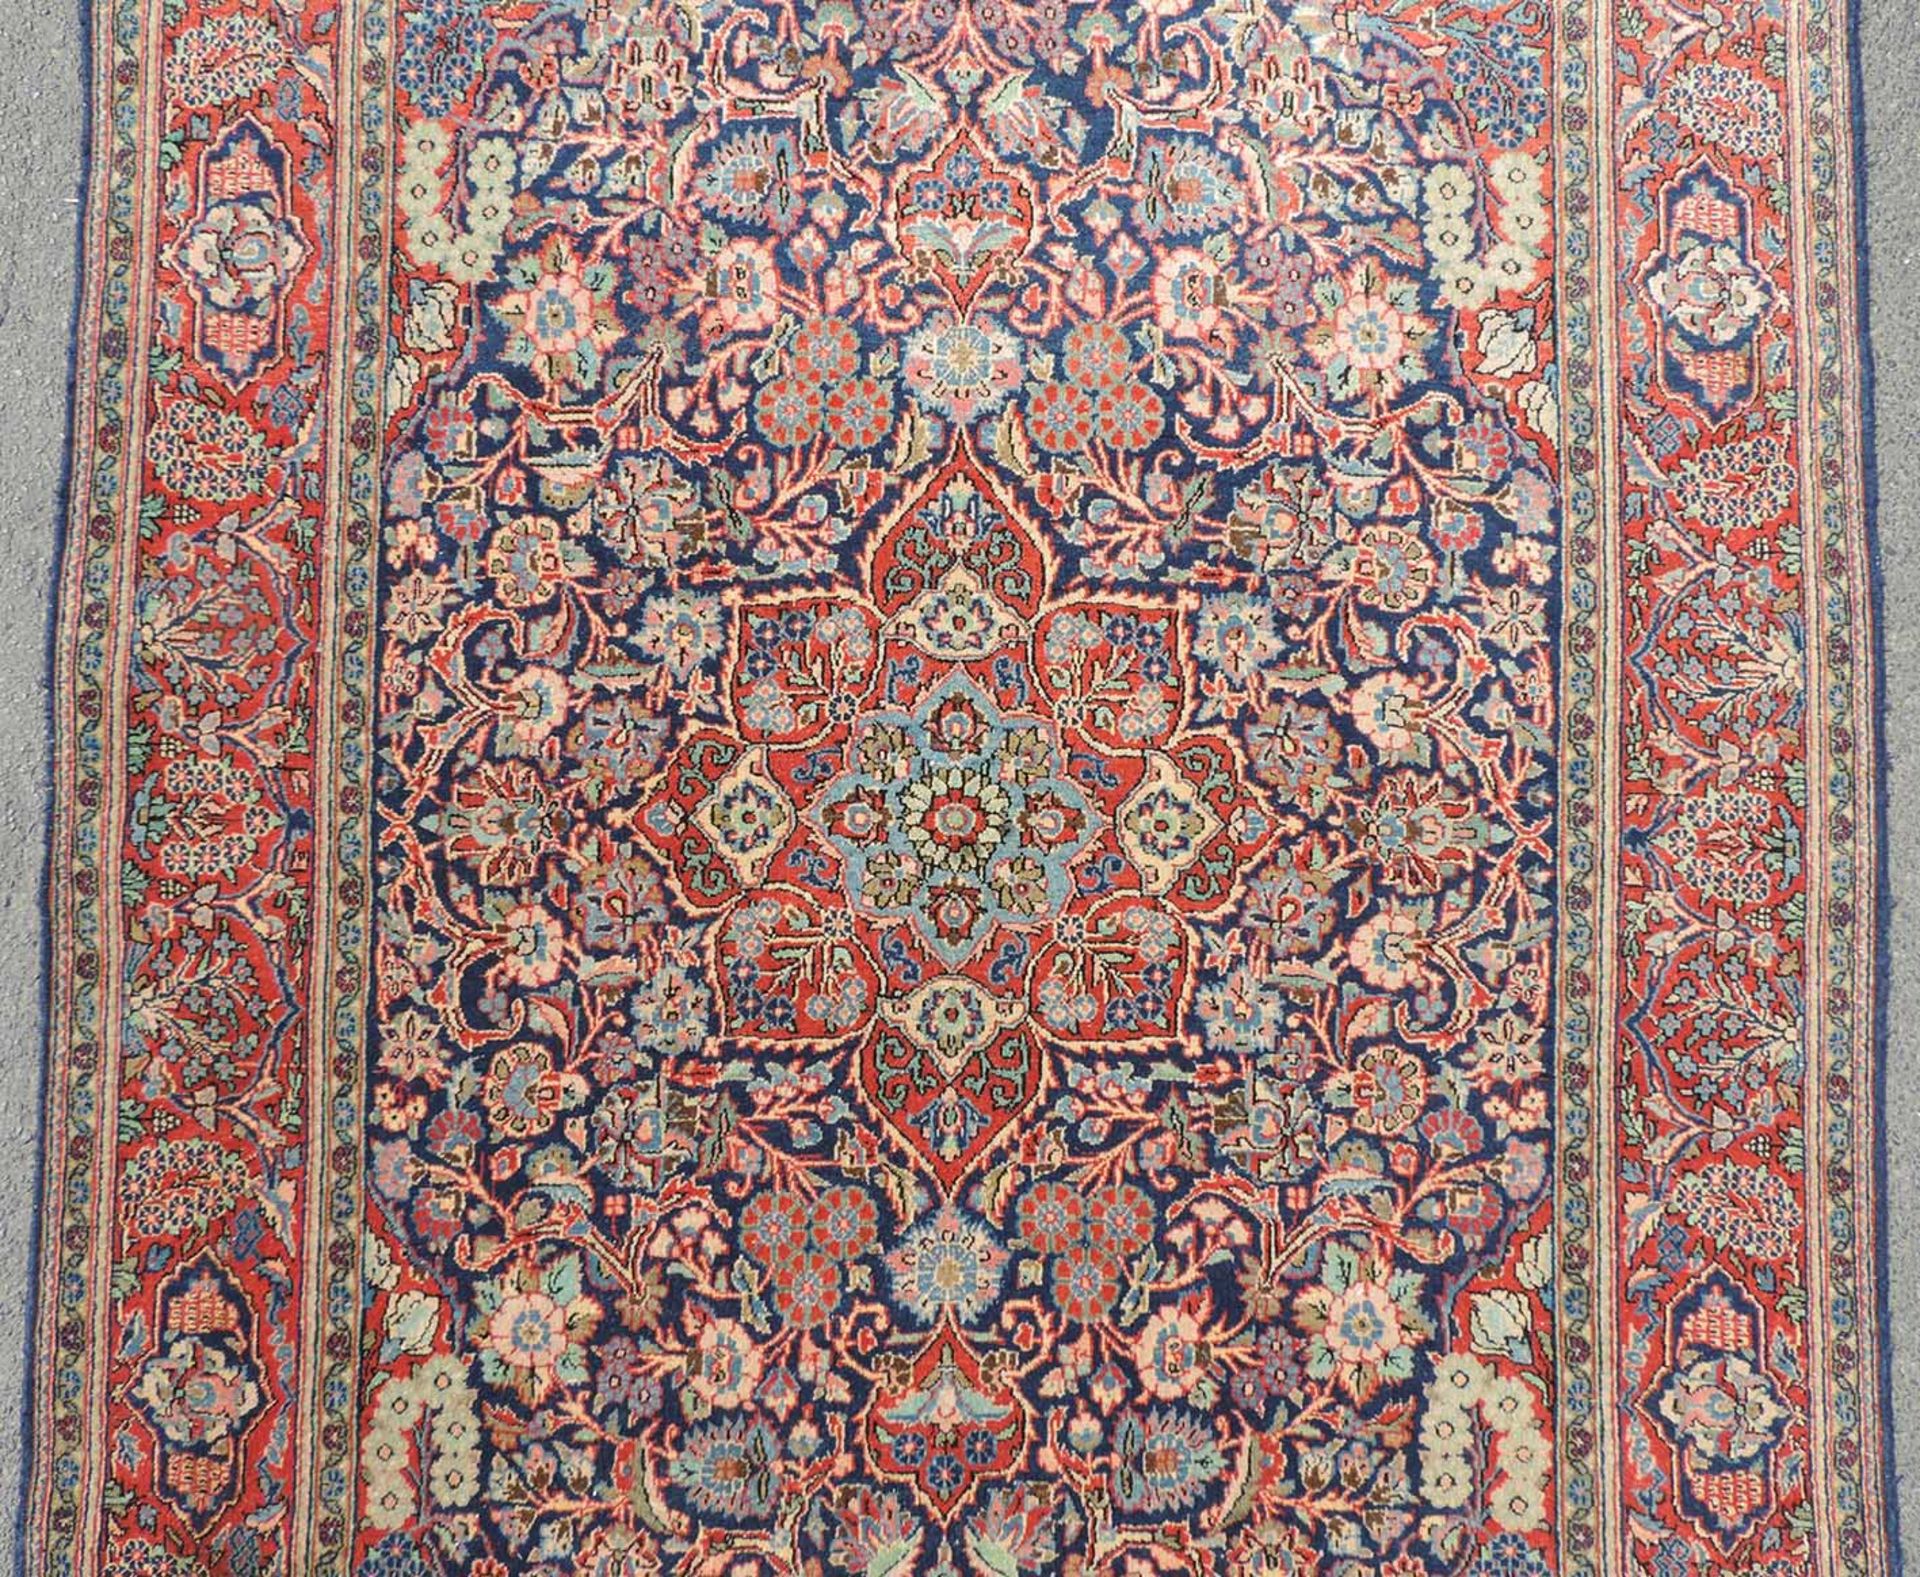 Keschan Persian rug. Iran. Old, circa 80 years. Fine weave.221 cm x 134 cm. Knotted by hand. Cork - Image 3 of 6